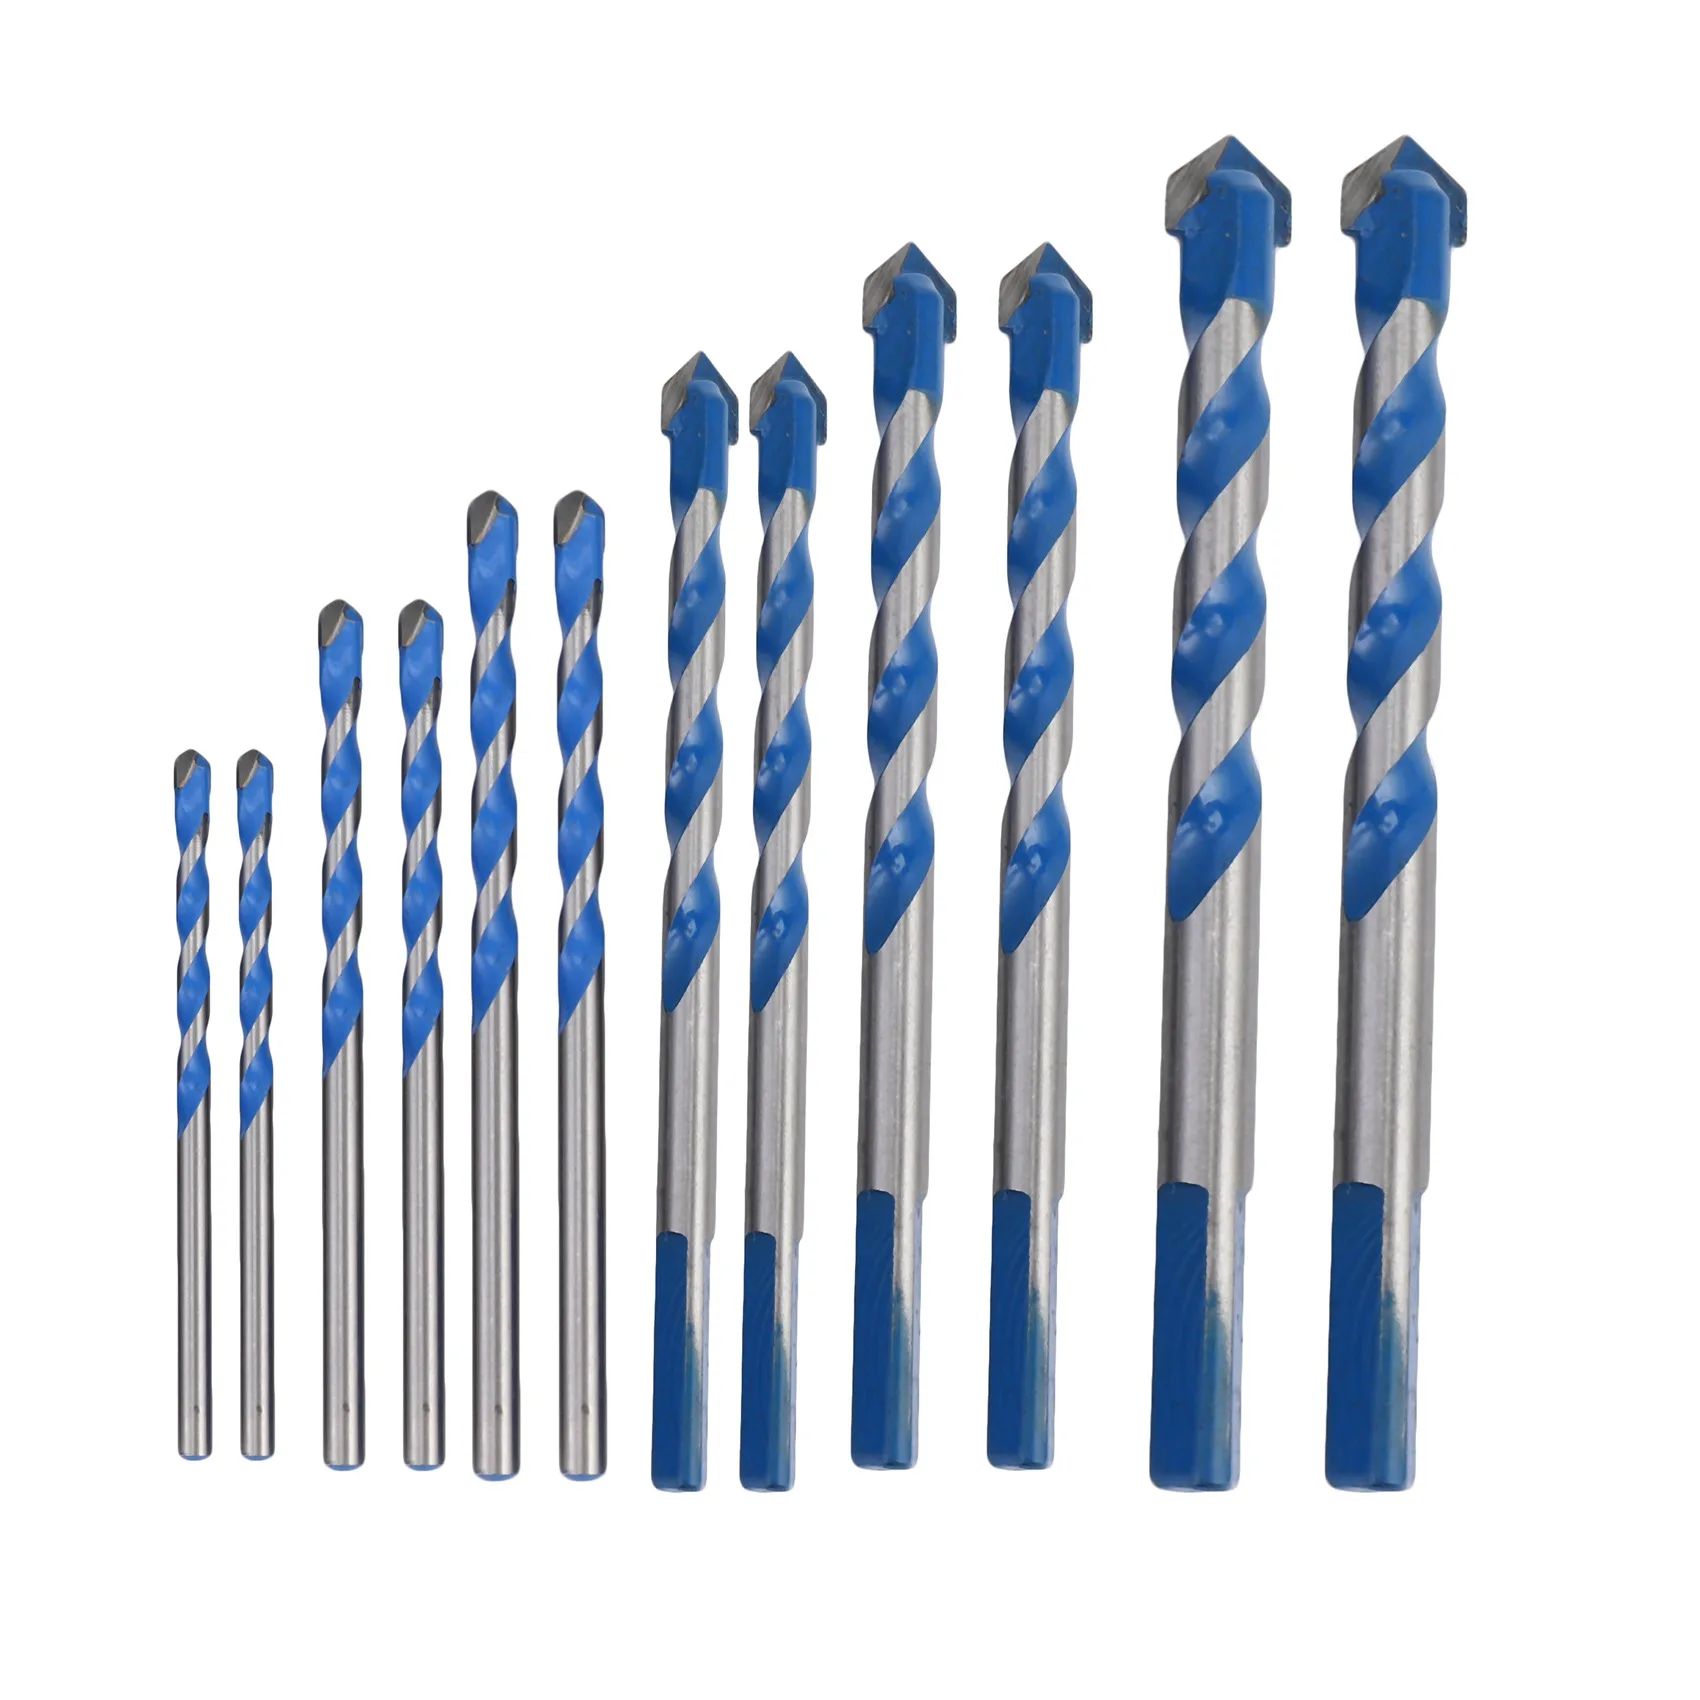 

12 Pcs Masonry Drill Bits Set 3mm to 12mm Carbide Twist Tips for WALL BRICK CEMENT CONCRETE GLASS WOOD) Have Industrial Stren